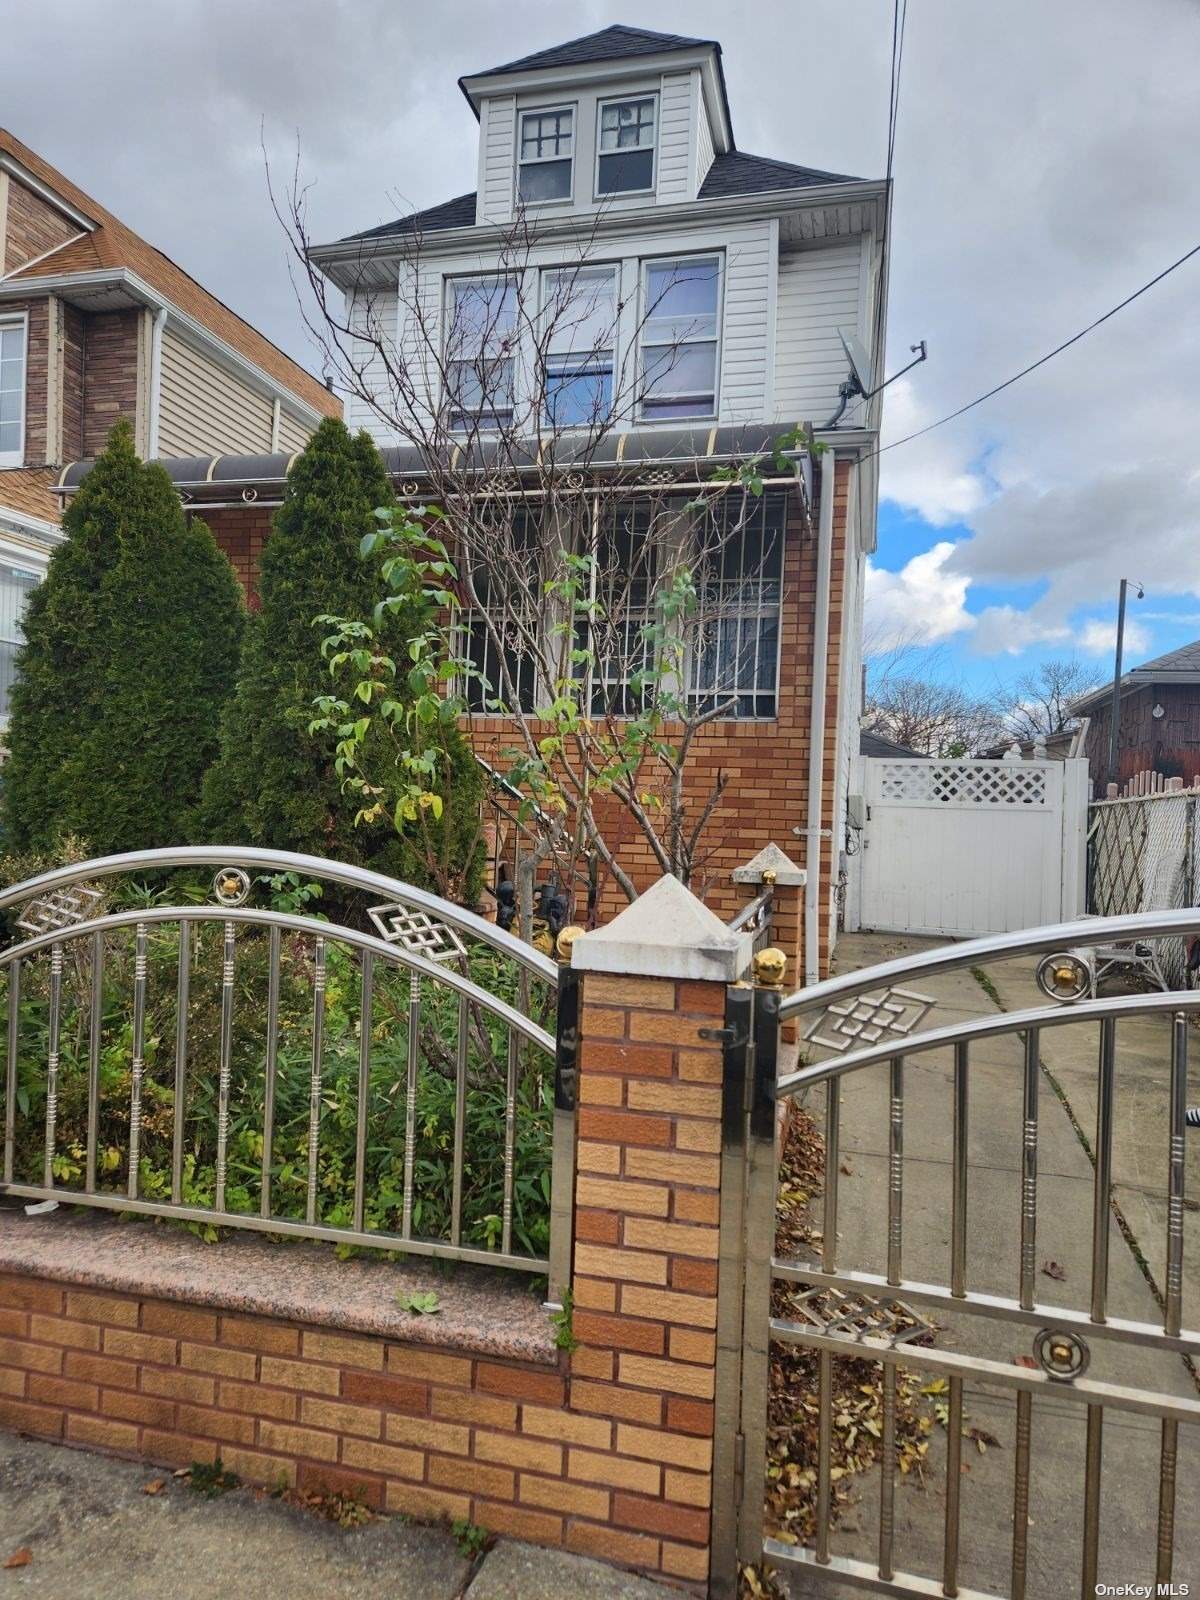 Listing in South Ozone Park, NY